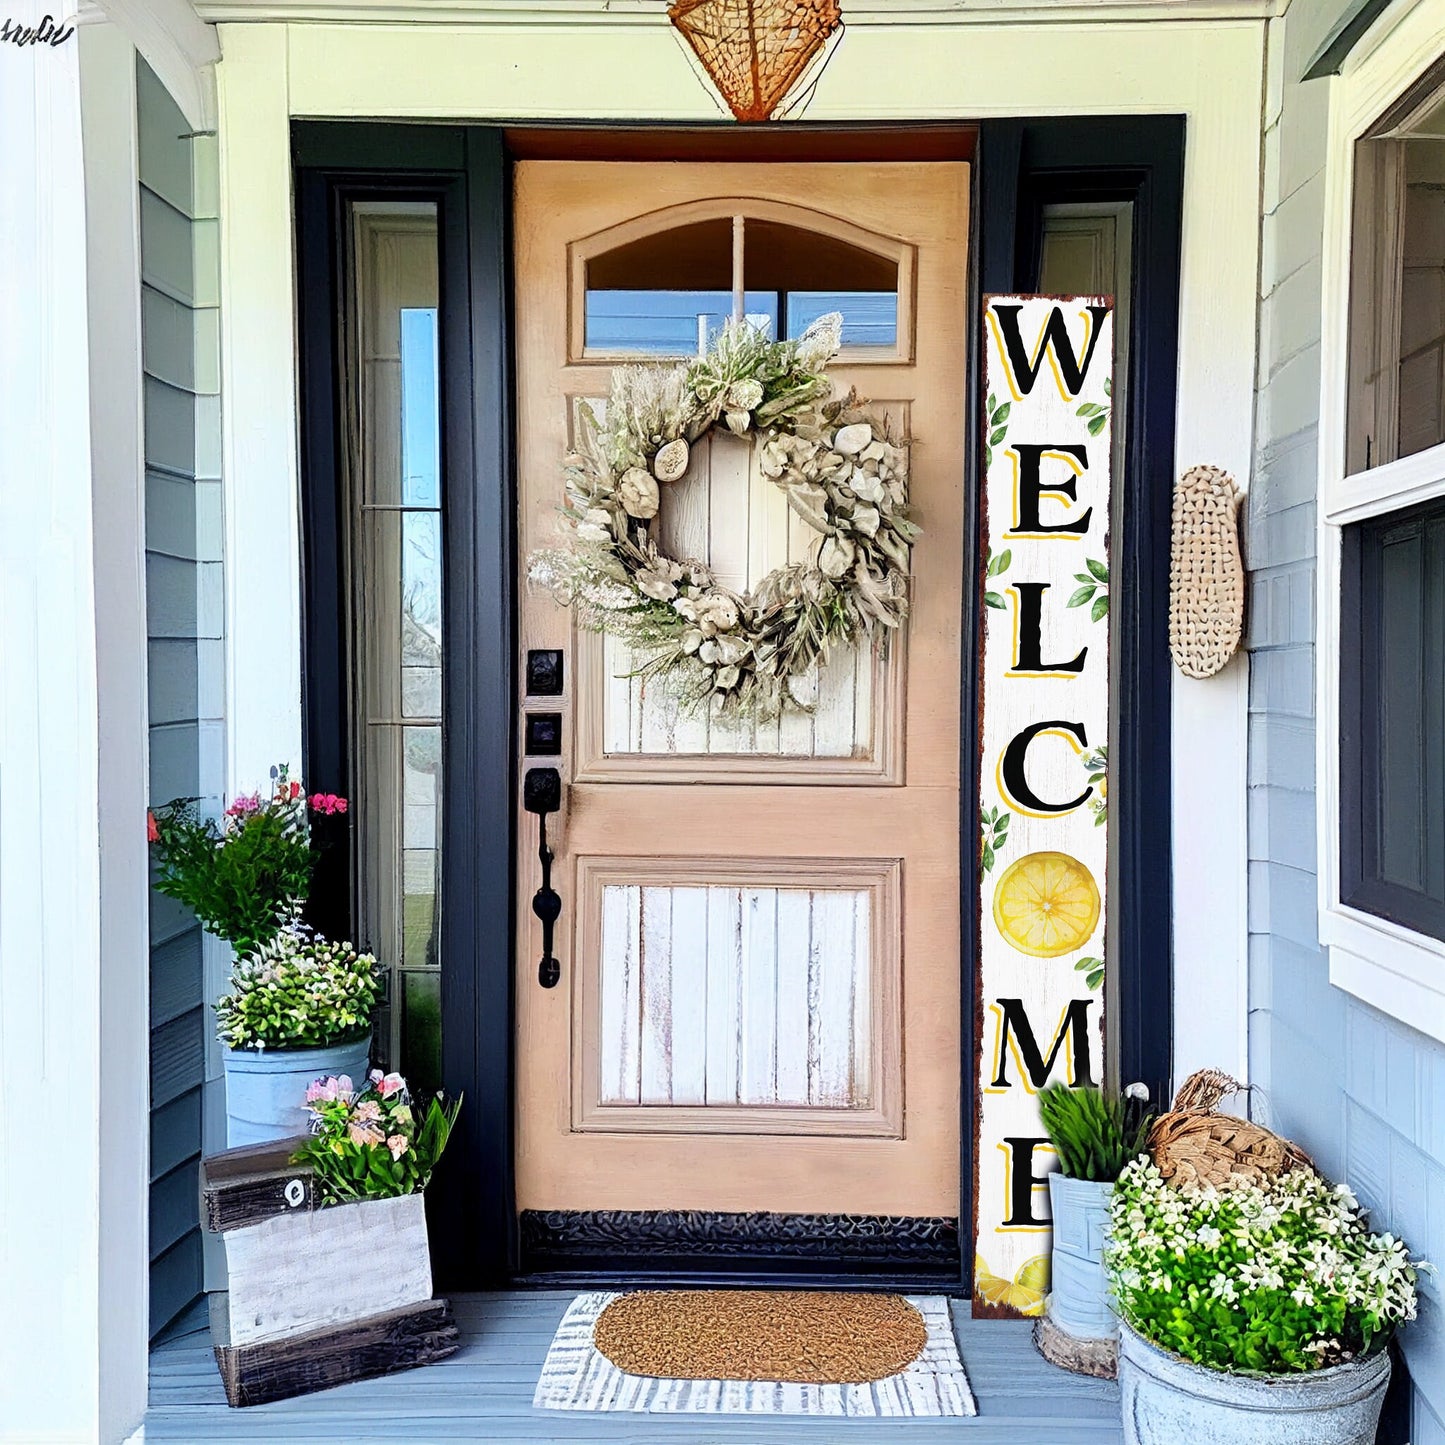 72in Fresh Lemon Summer Welcome Porch Sign | Rustic Wooden Decor | Outdoor Wall Art | Vibrant Farmhouse Patio Display